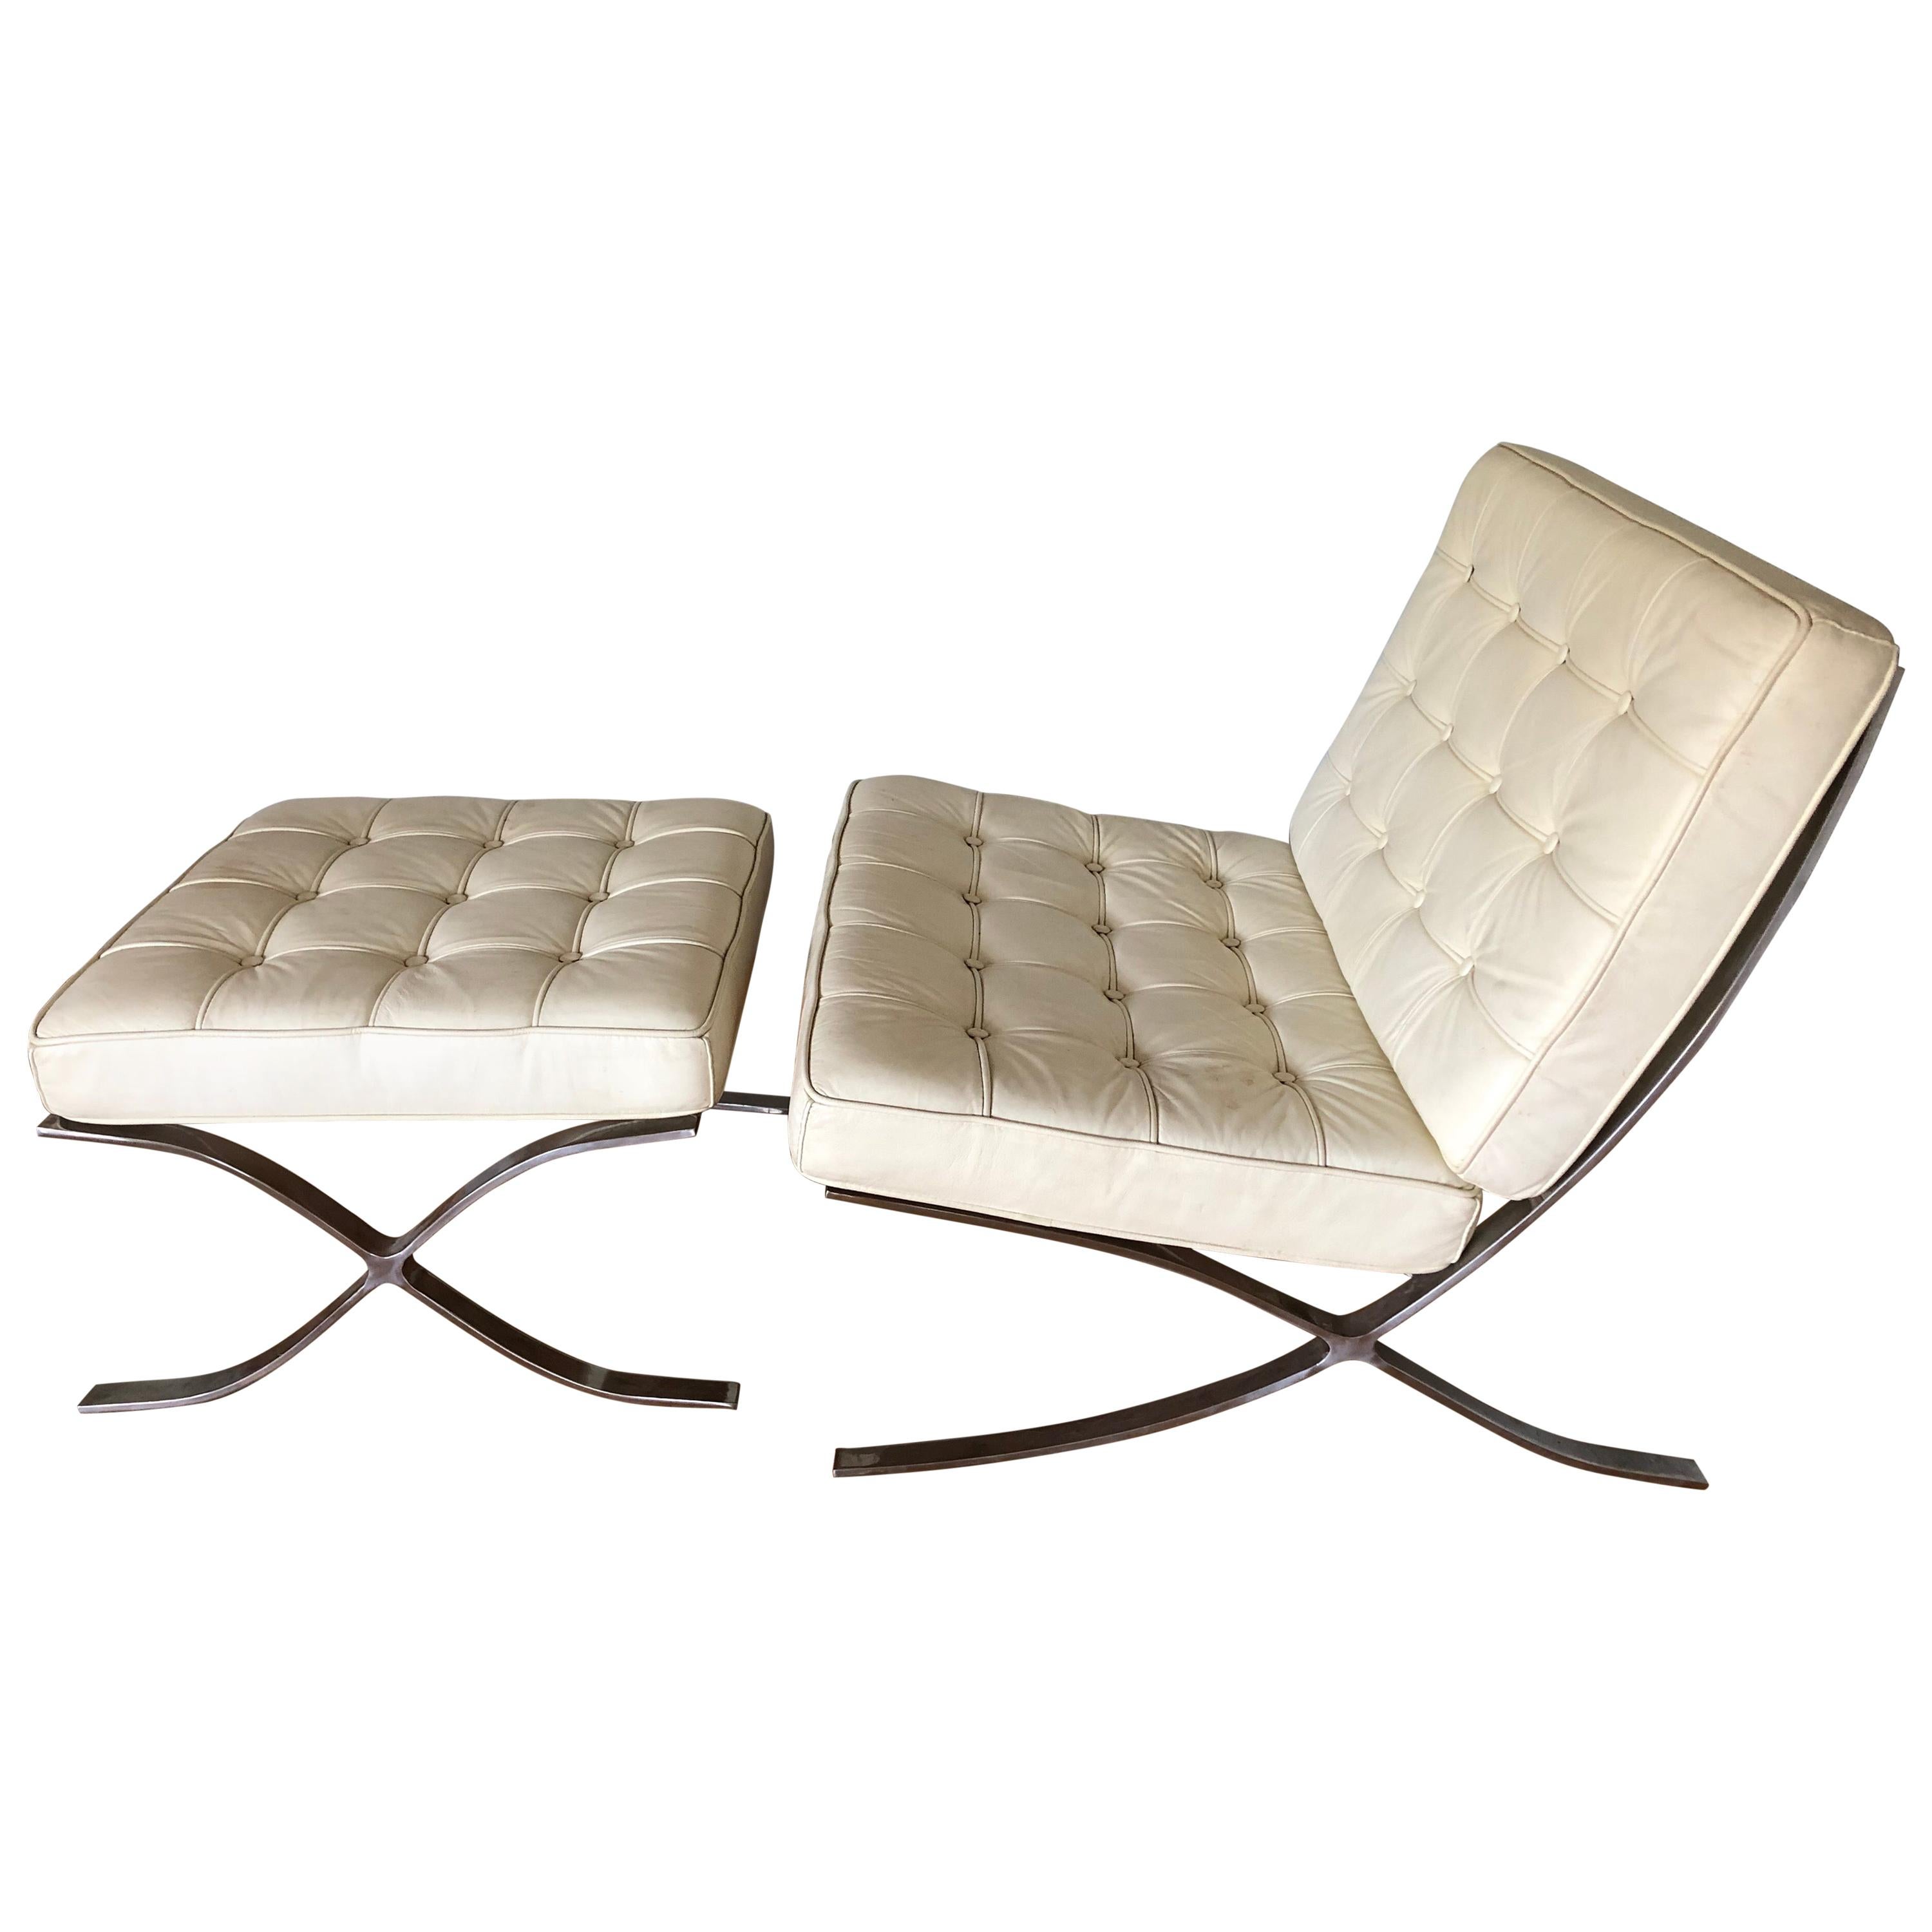 Barcelona Chair and Ottoman Attributed to Mies van der Rohe